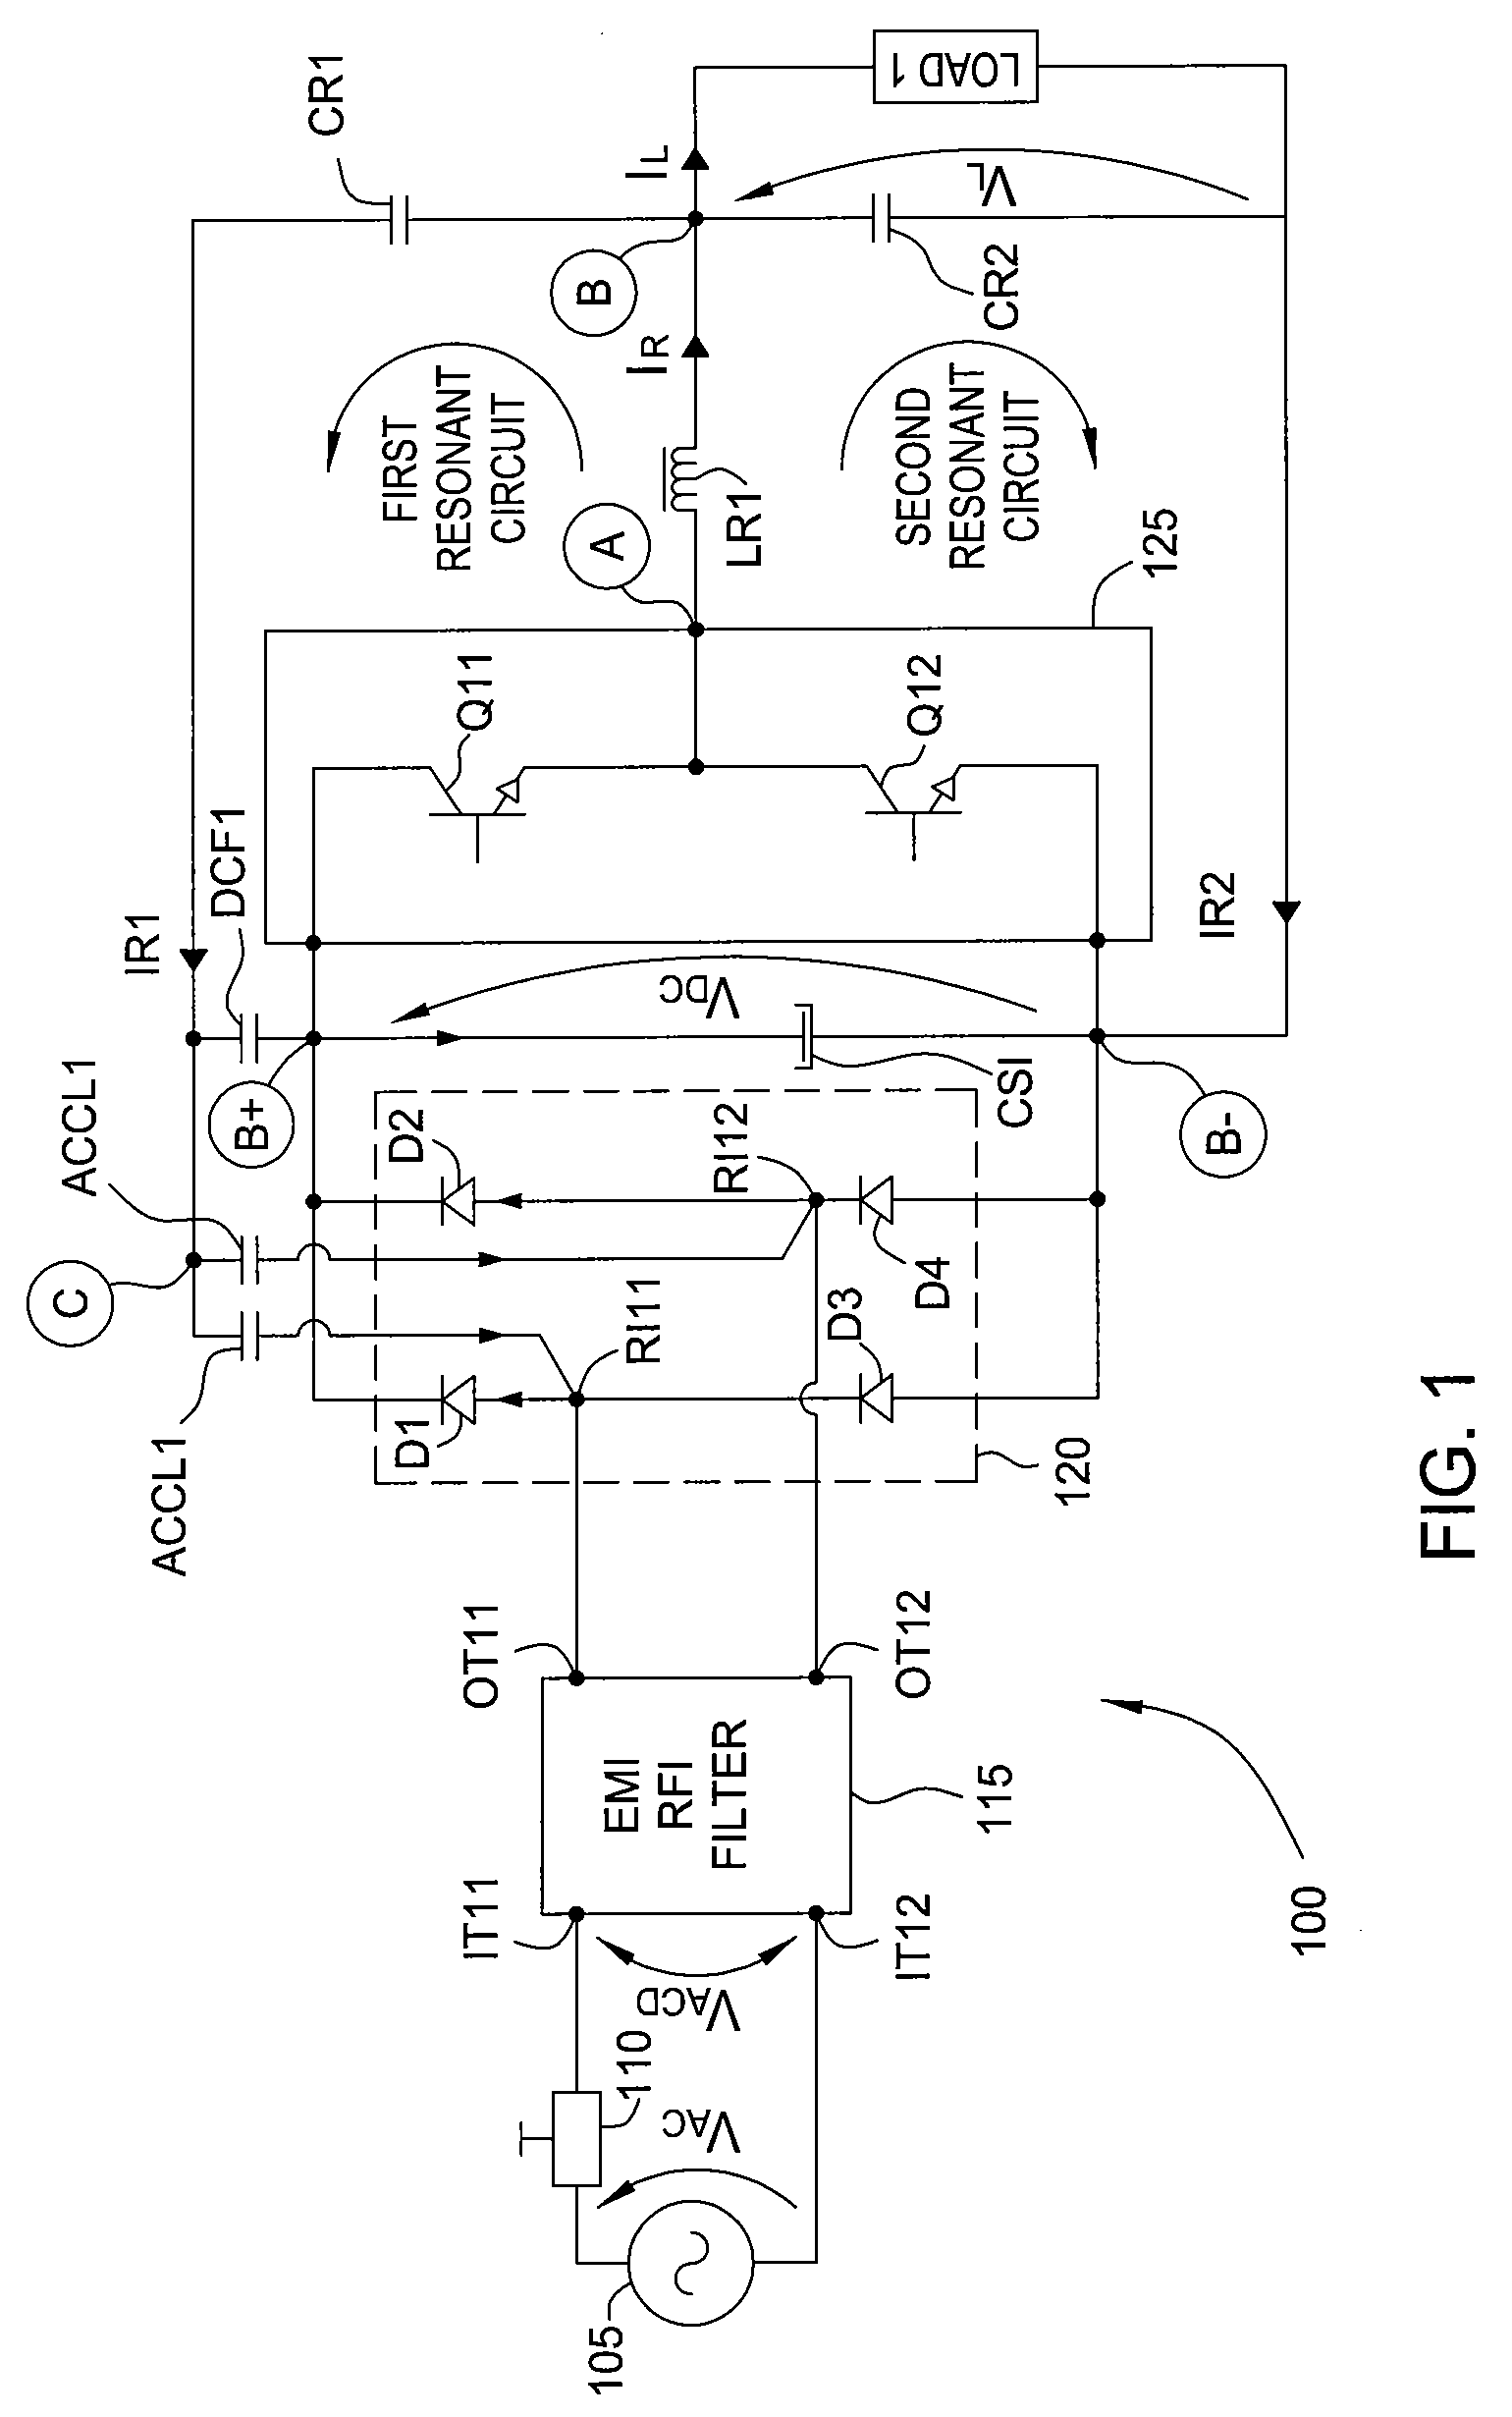 Apparatus and method enabling fully dimmable operation of a compact fluorescent lamp